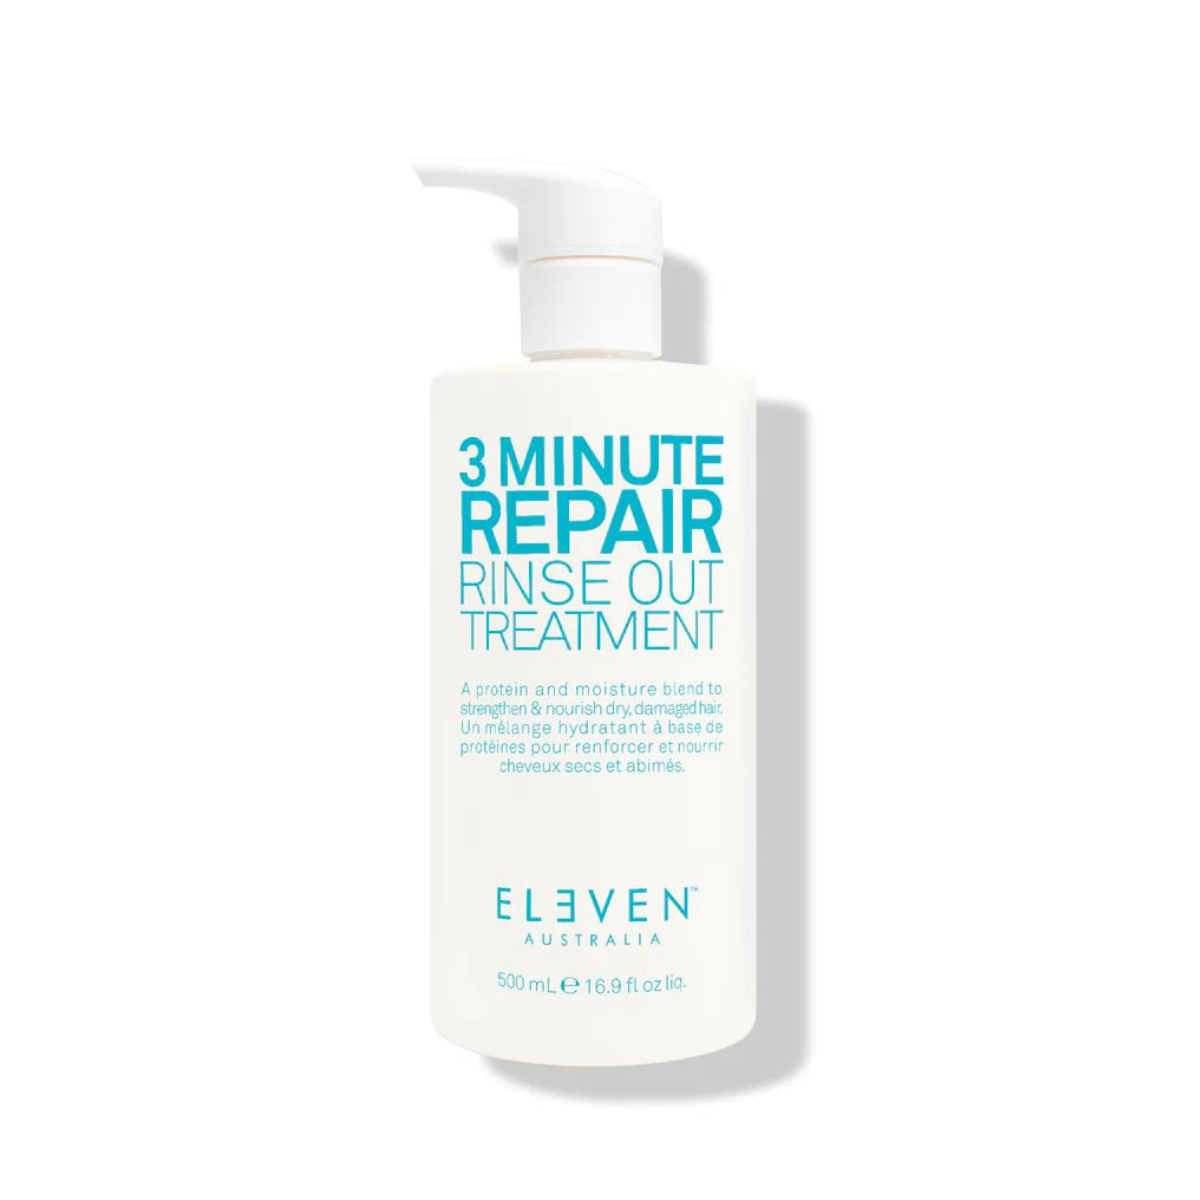 Eleven 3 Minute Rinse Out Repair Treatment- 500ml